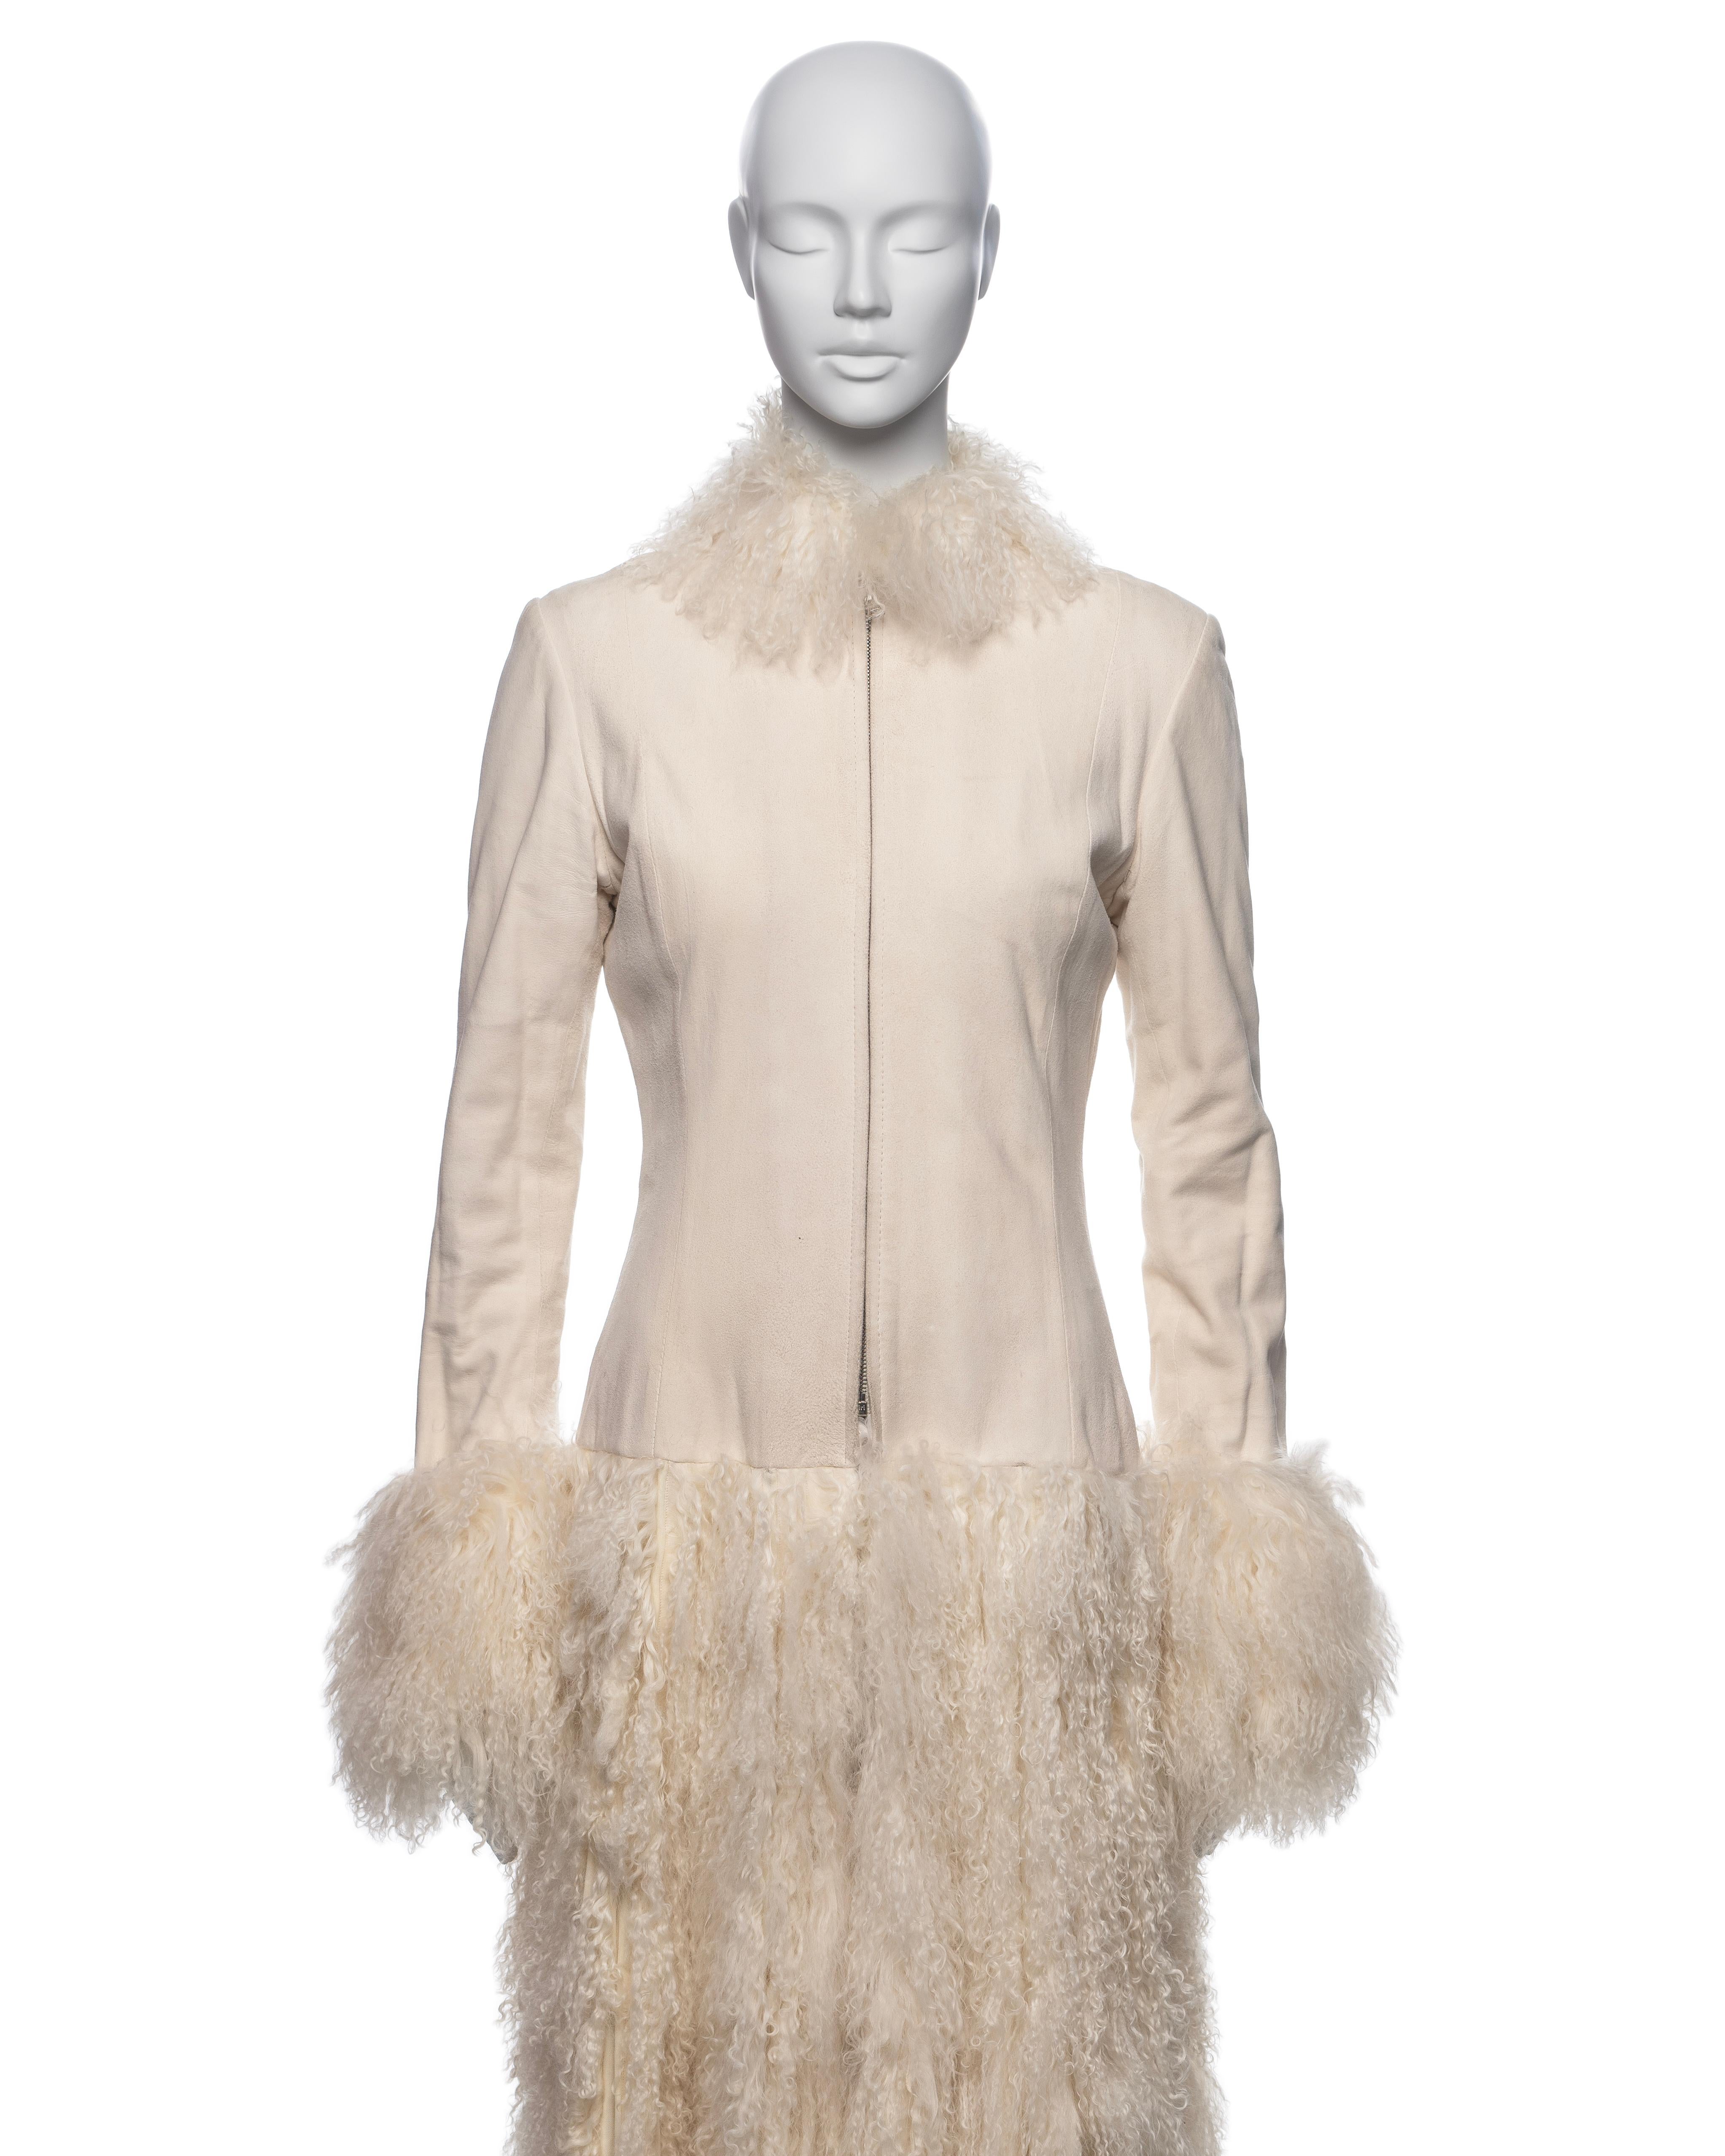 Jean Paul Gaultier White Mongolian Lamb Fur and Leather Coat Dress, FW 2006 In Good Condition For Sale In London, GB